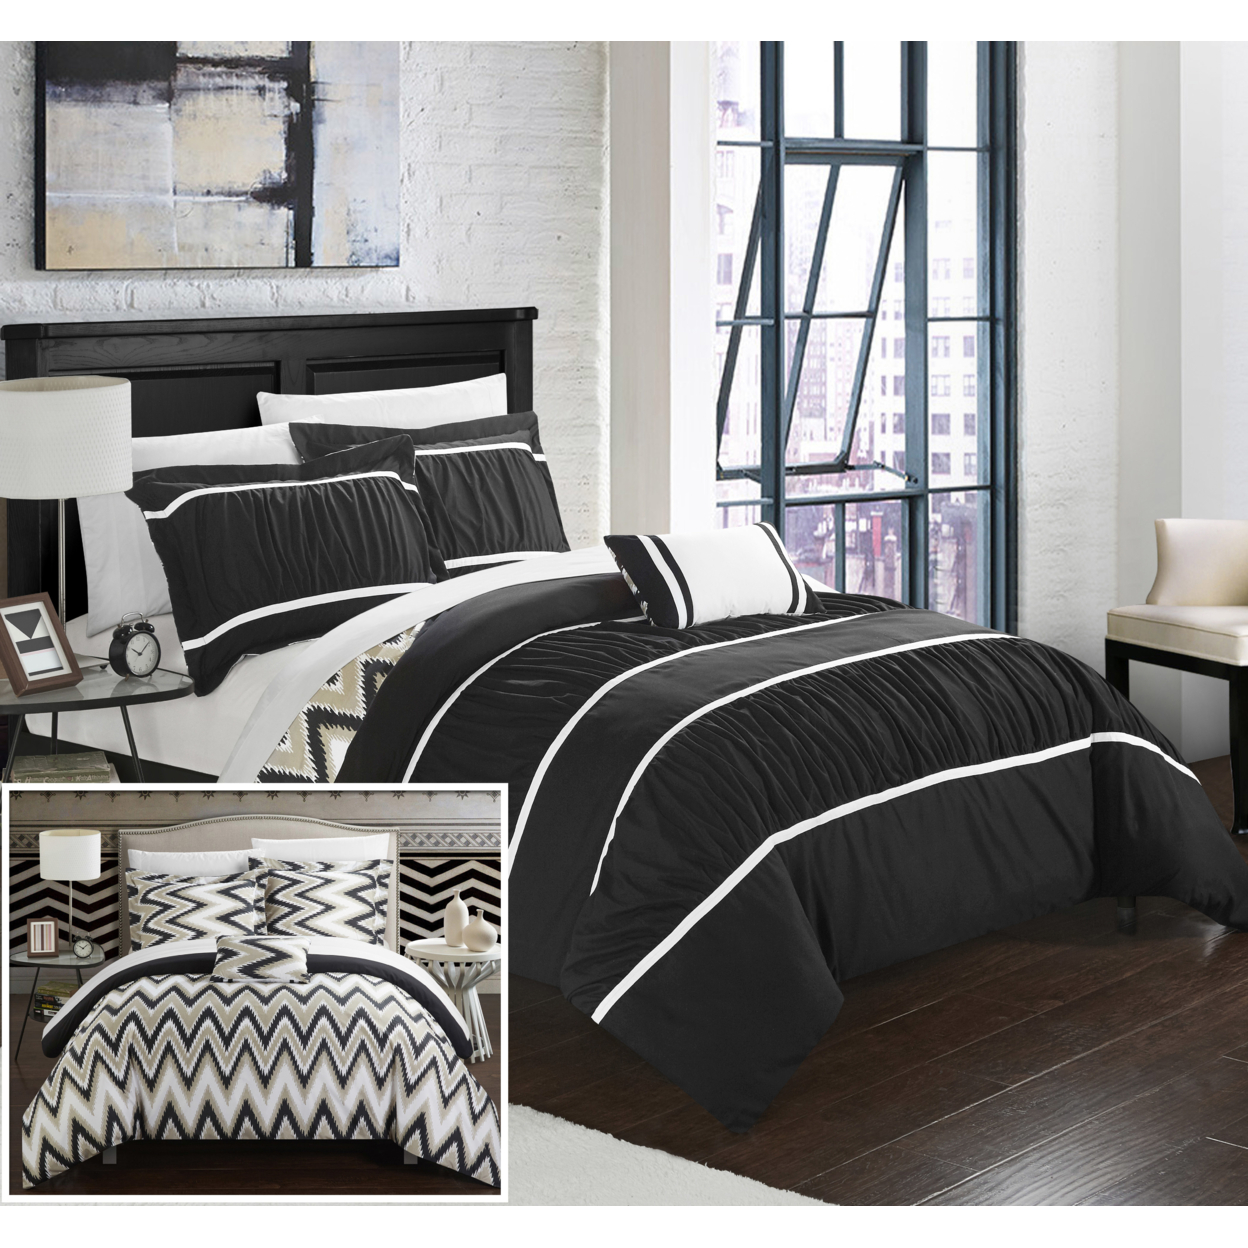 4 Or 3 Piece Lucia Pleated & Ruffled With Chevron REVERSIBLE Backing Comforter Set - Black, Twin